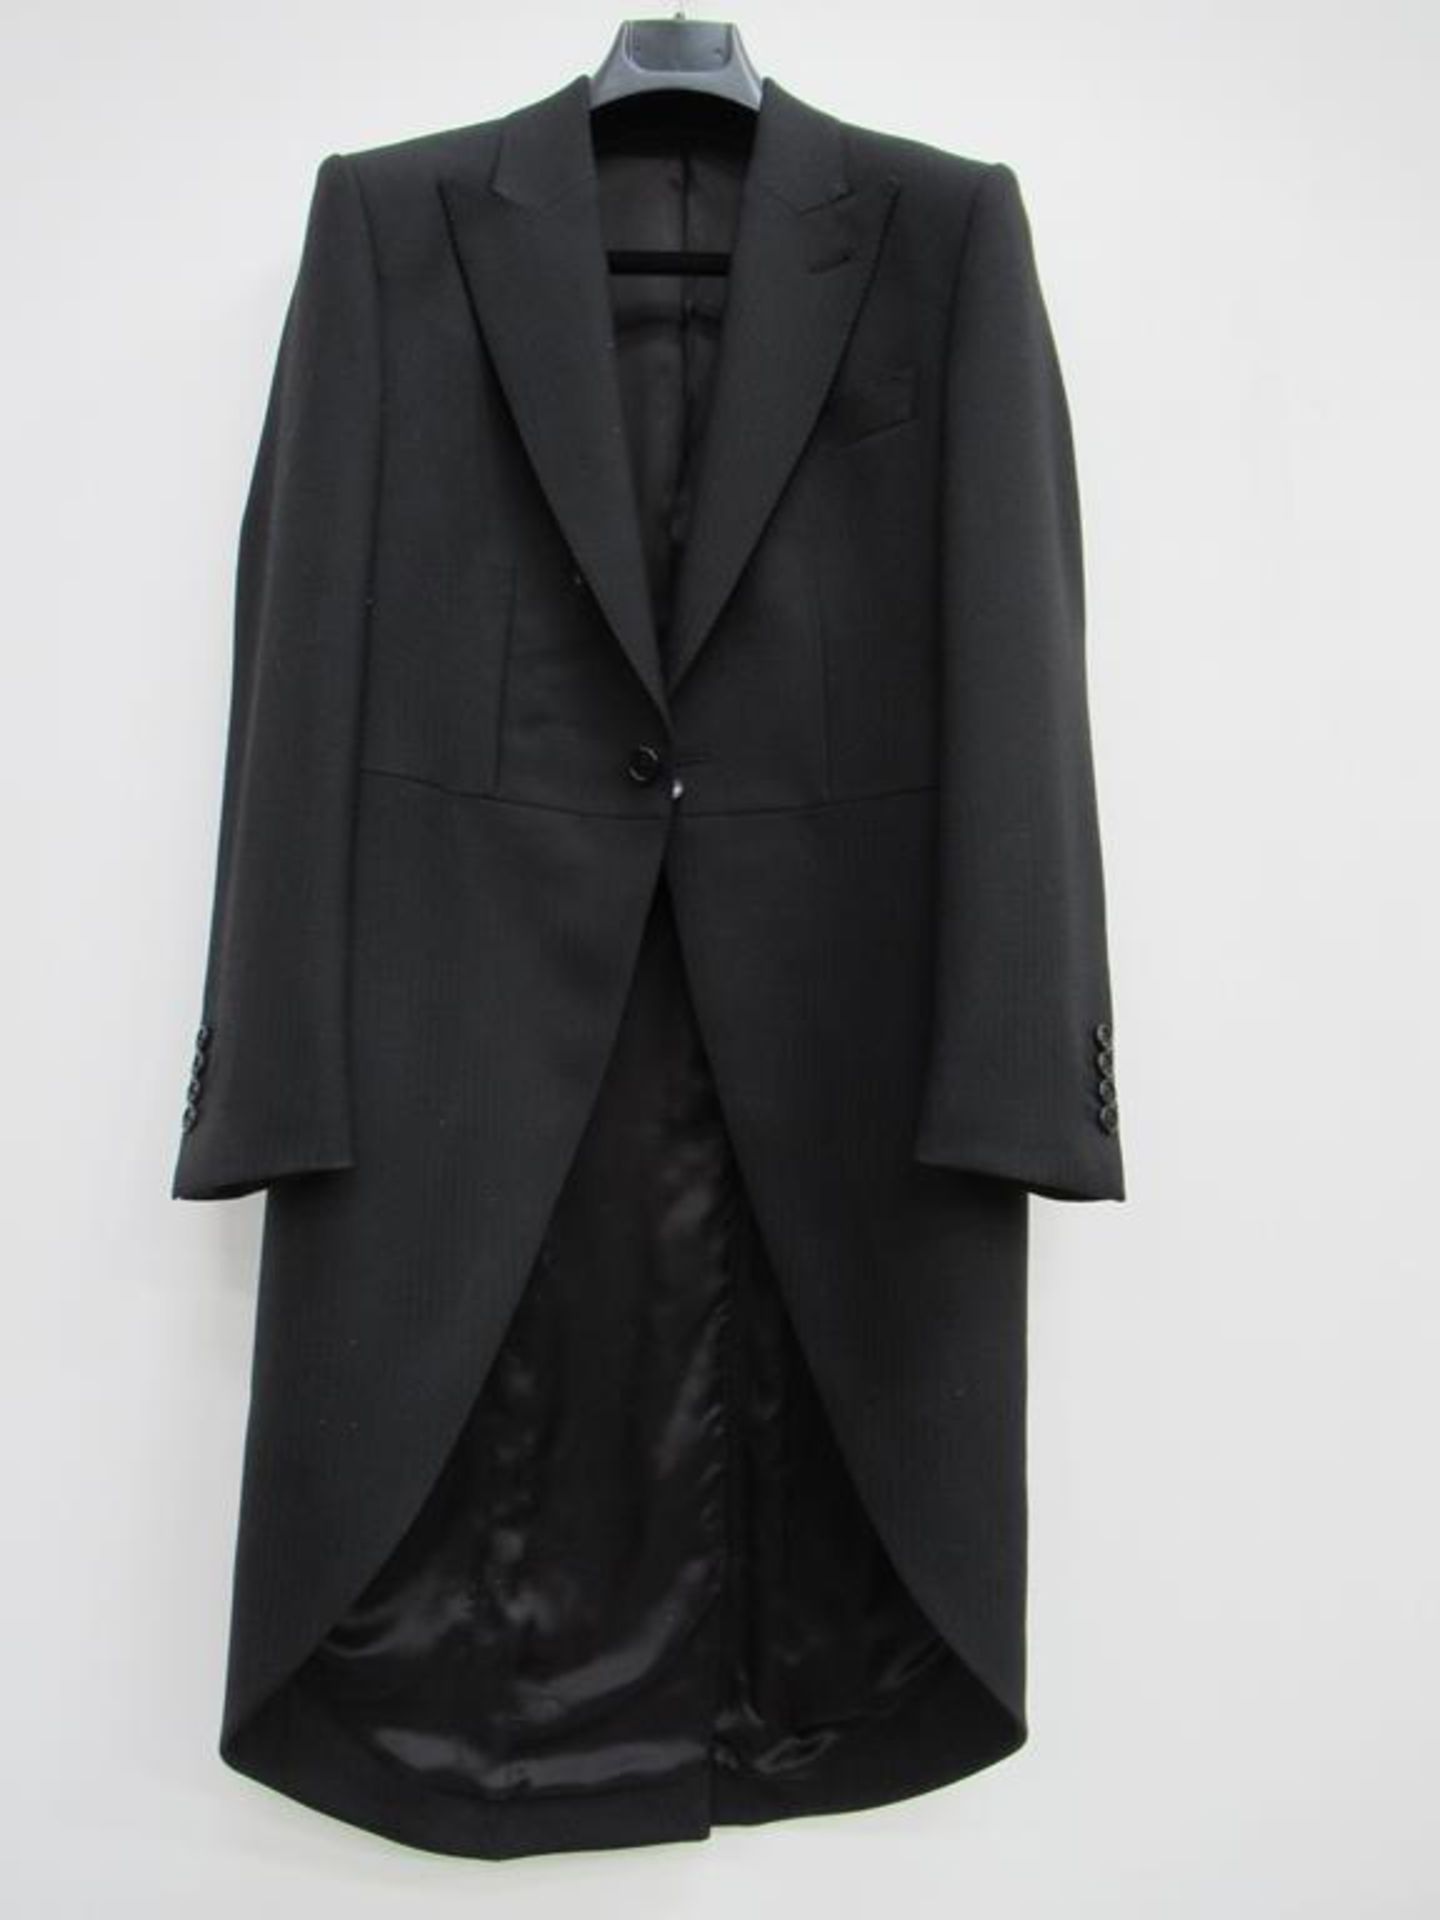 Morning coat (Black) 40L with 2 x double breasted morning waistcoats ...